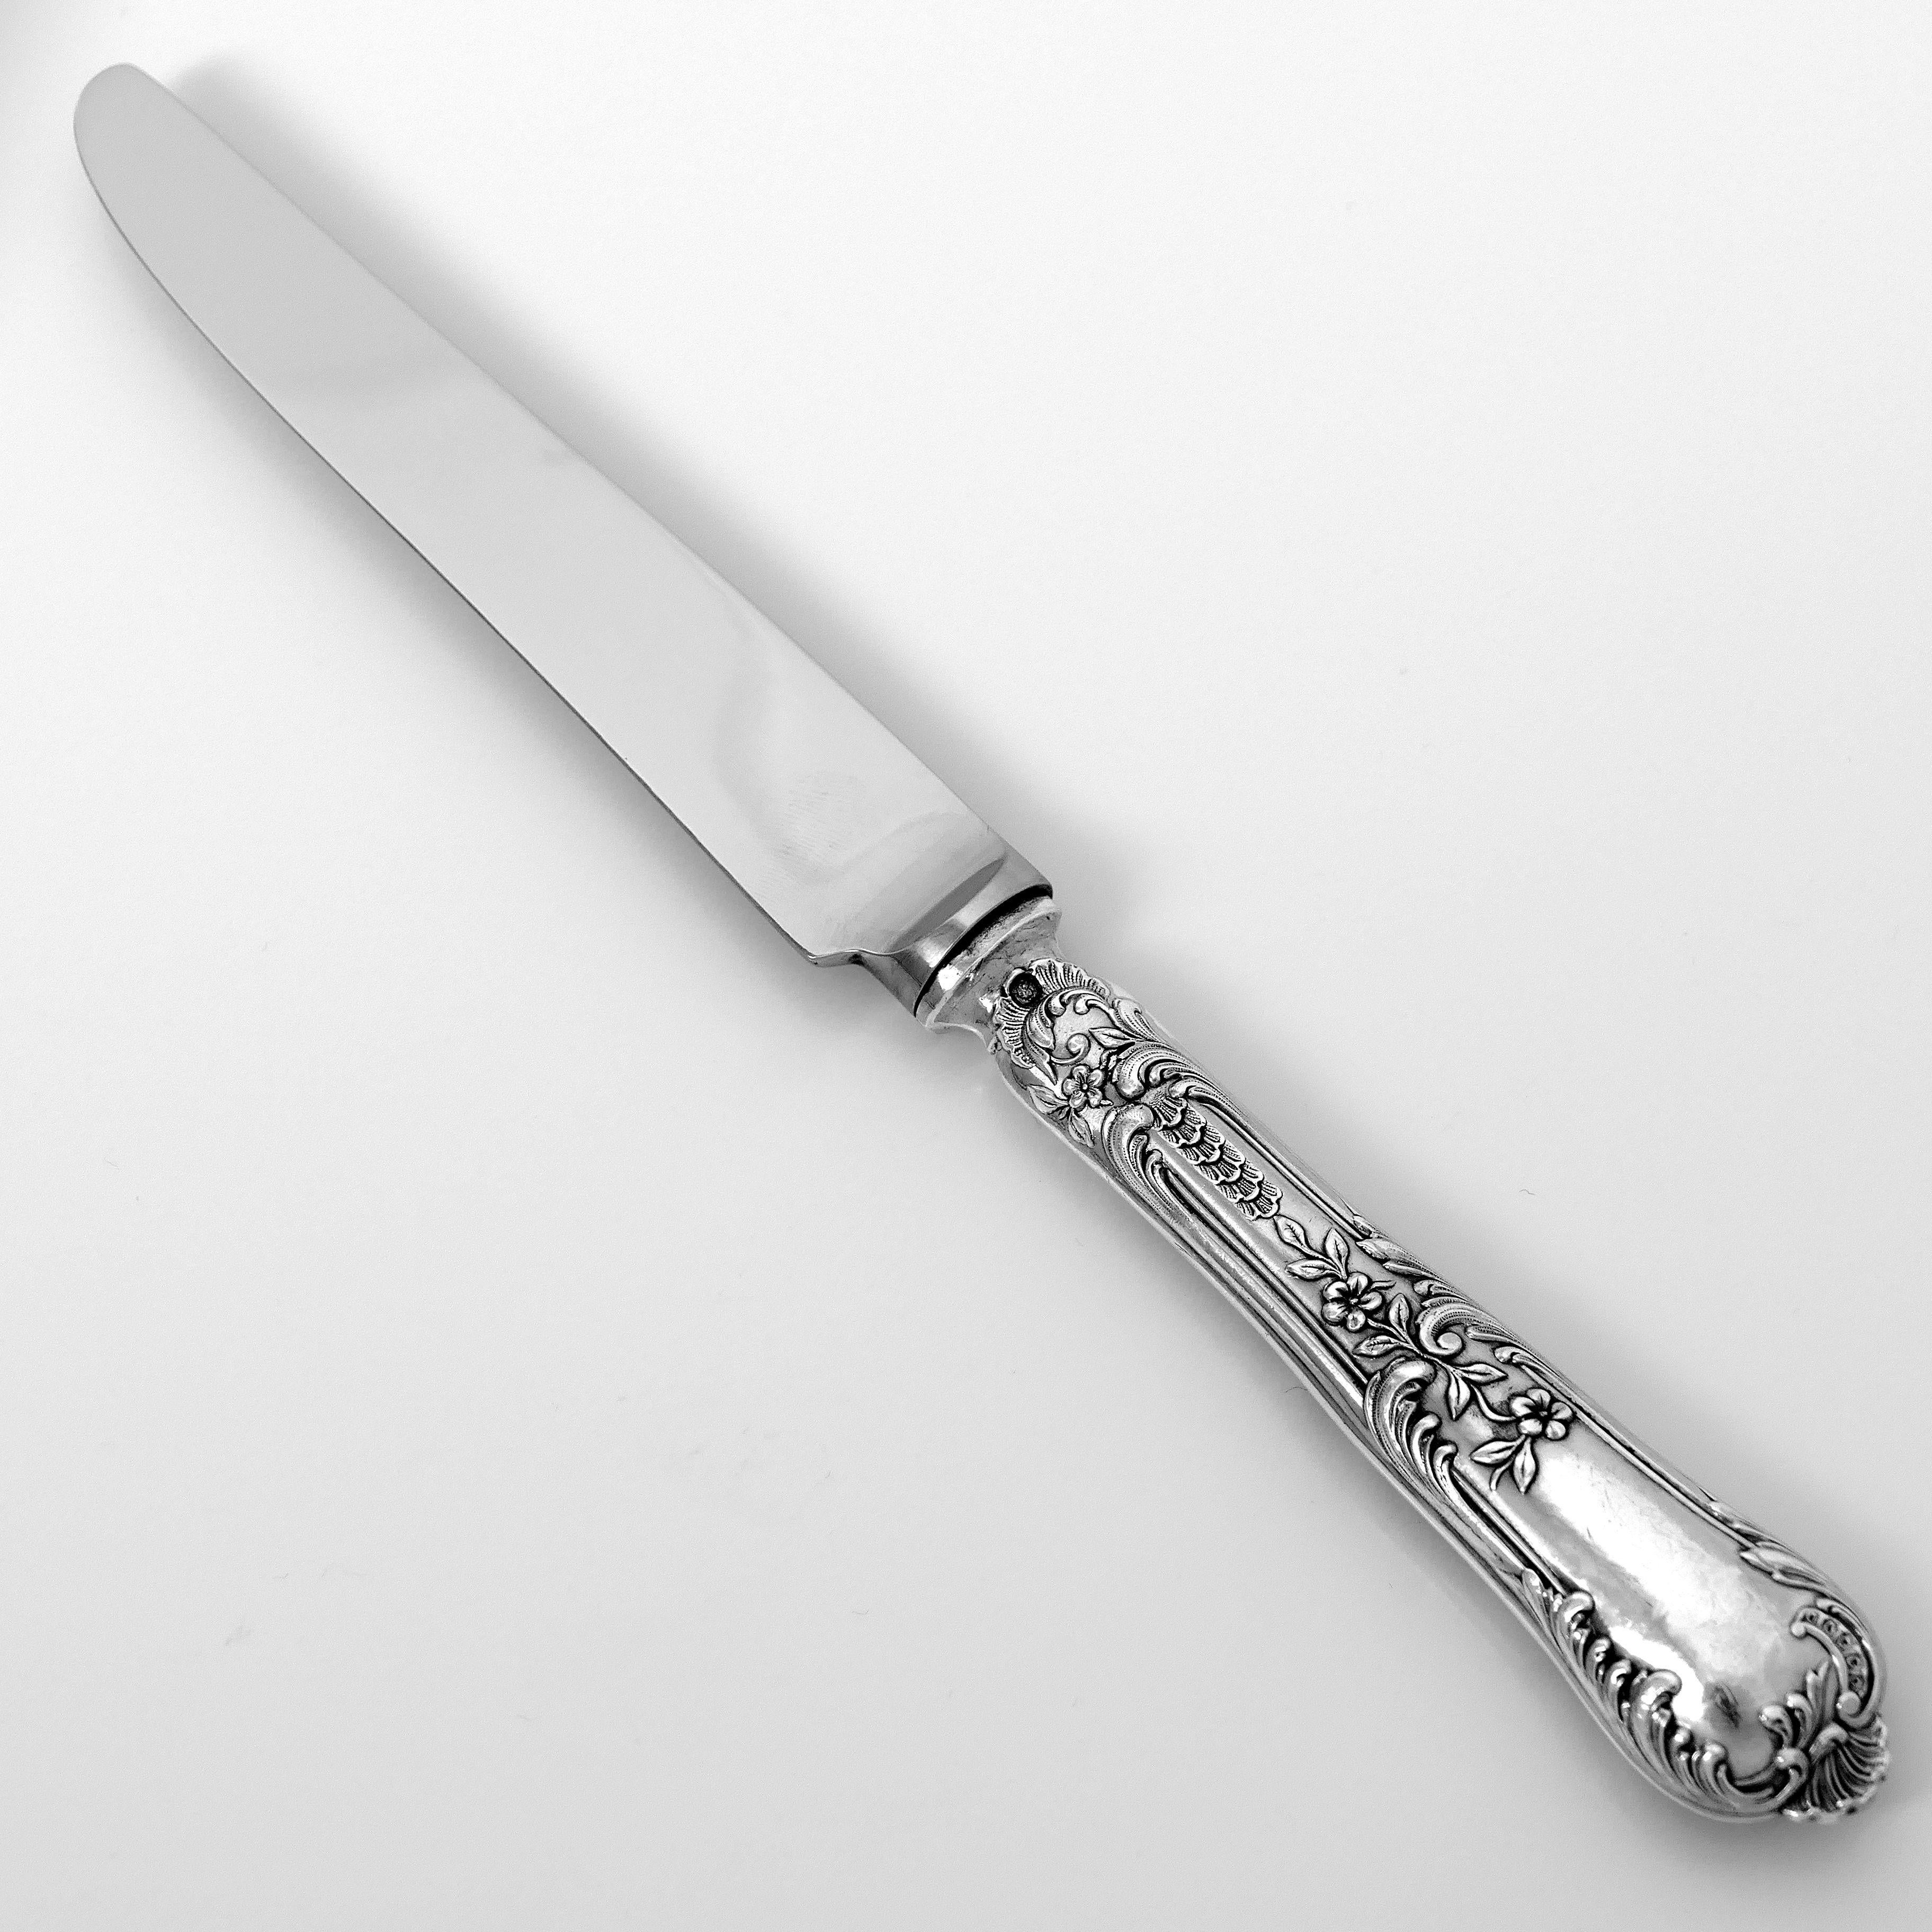 Art Nouveau Boulenger French Sterling Silver Dinner Knife Set 12 Piece New Stainless Blades For Sale